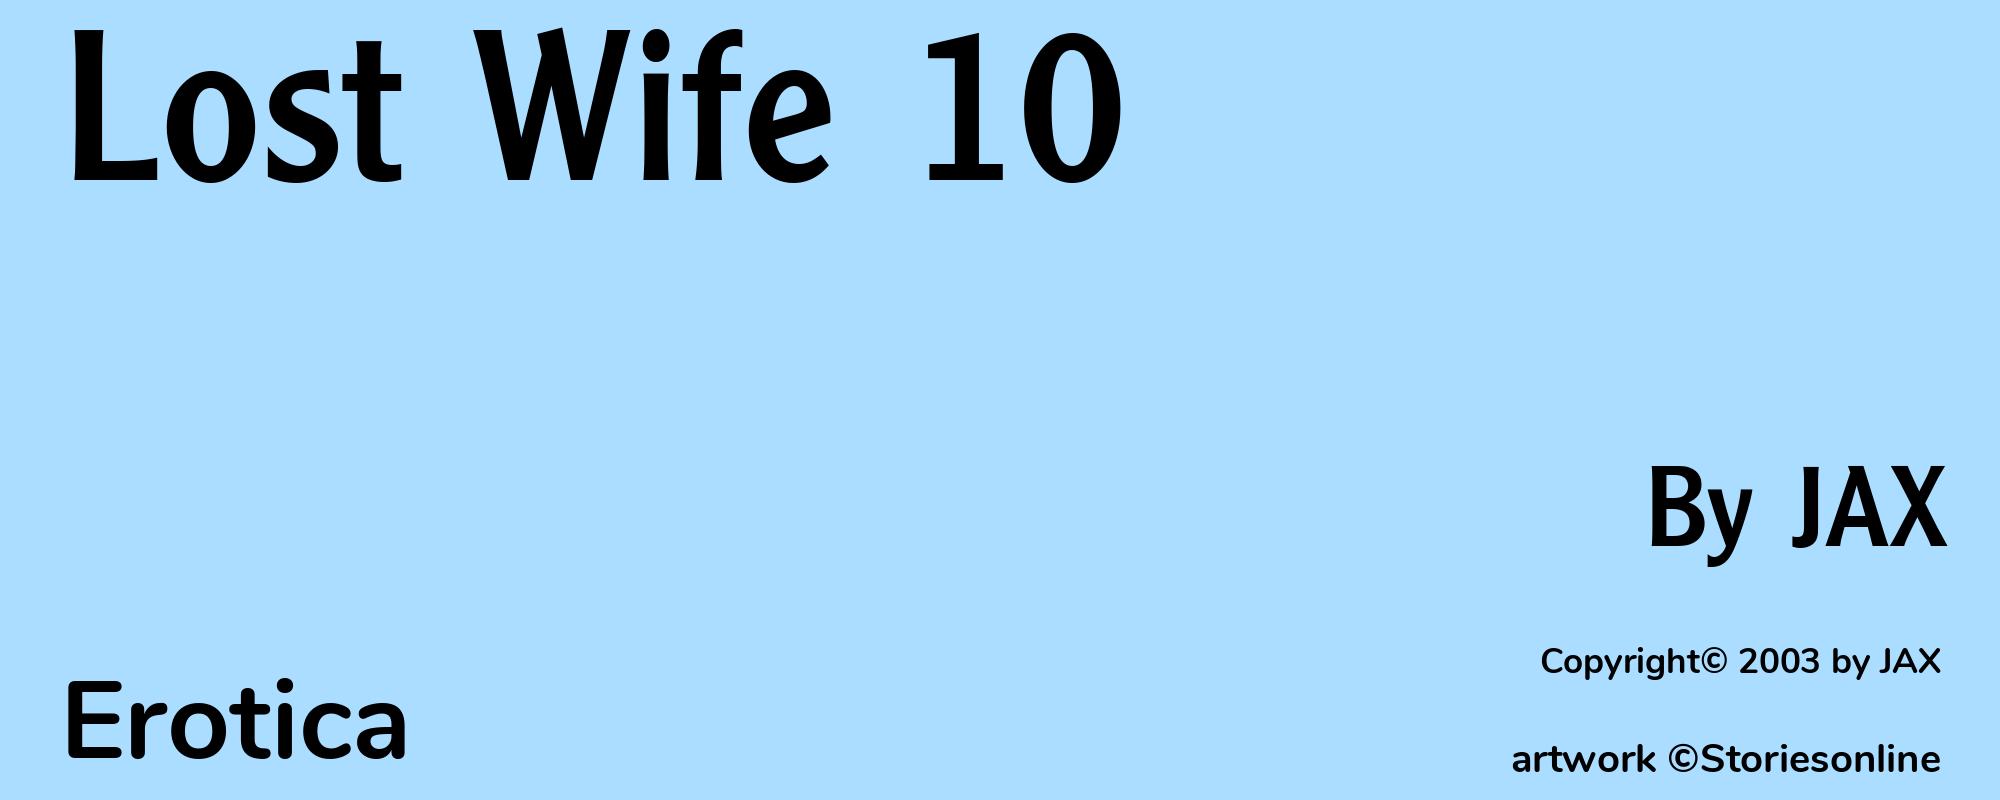 Lost Wife 10 - Cover